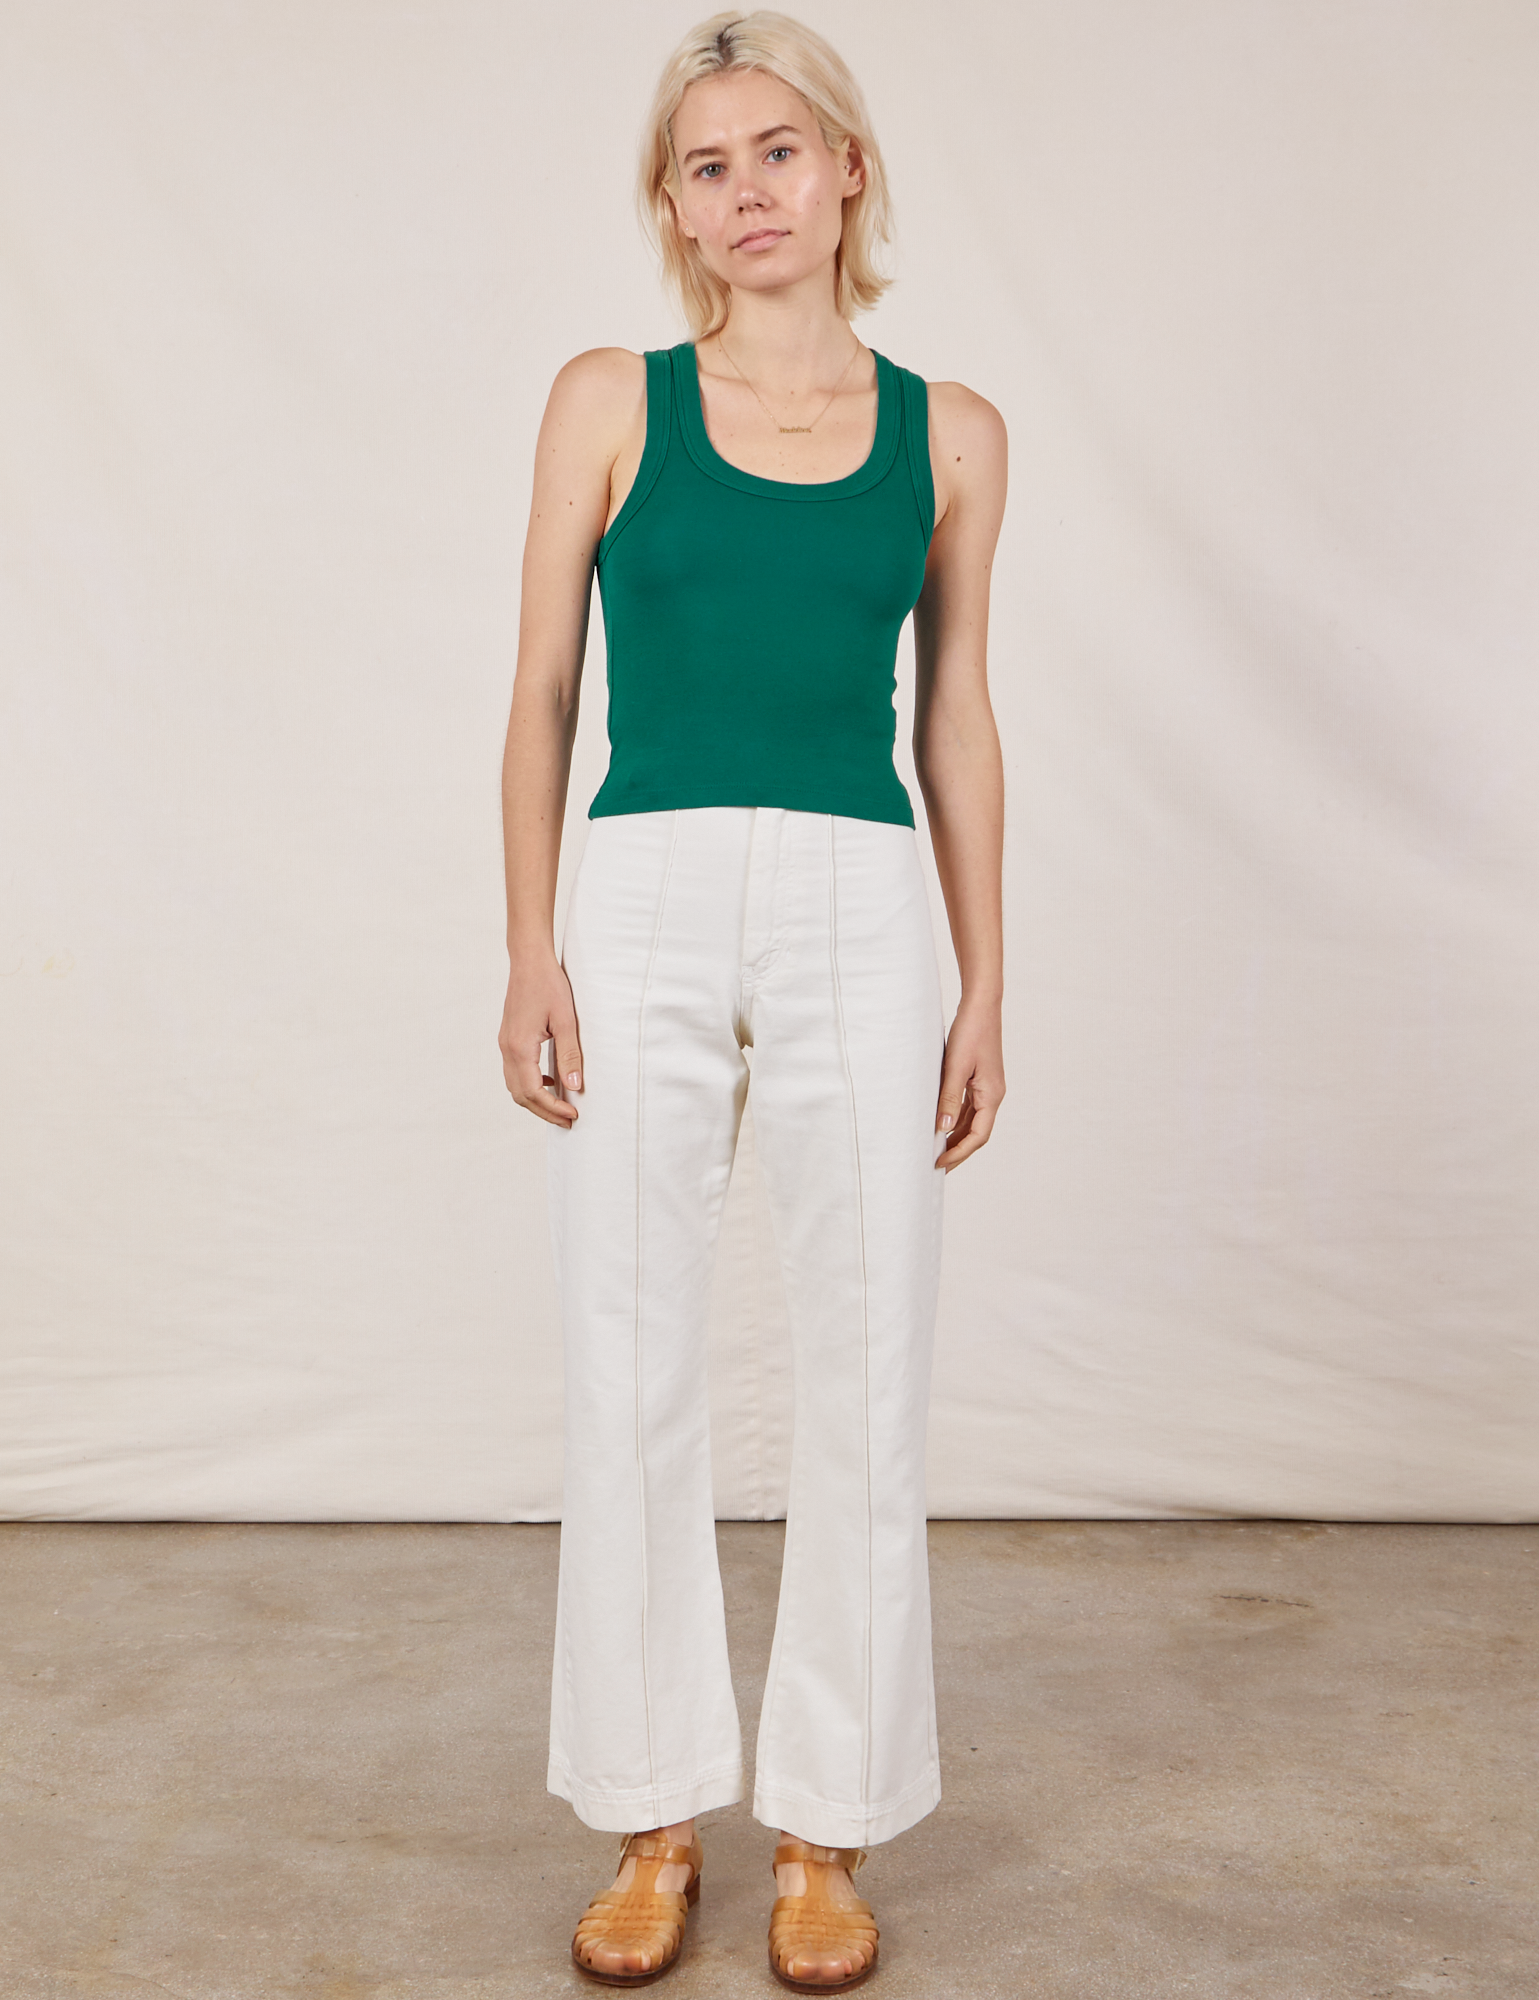 Madeline is wearing Tank Top in Hunter Green and vintage tee off-white Western Pants